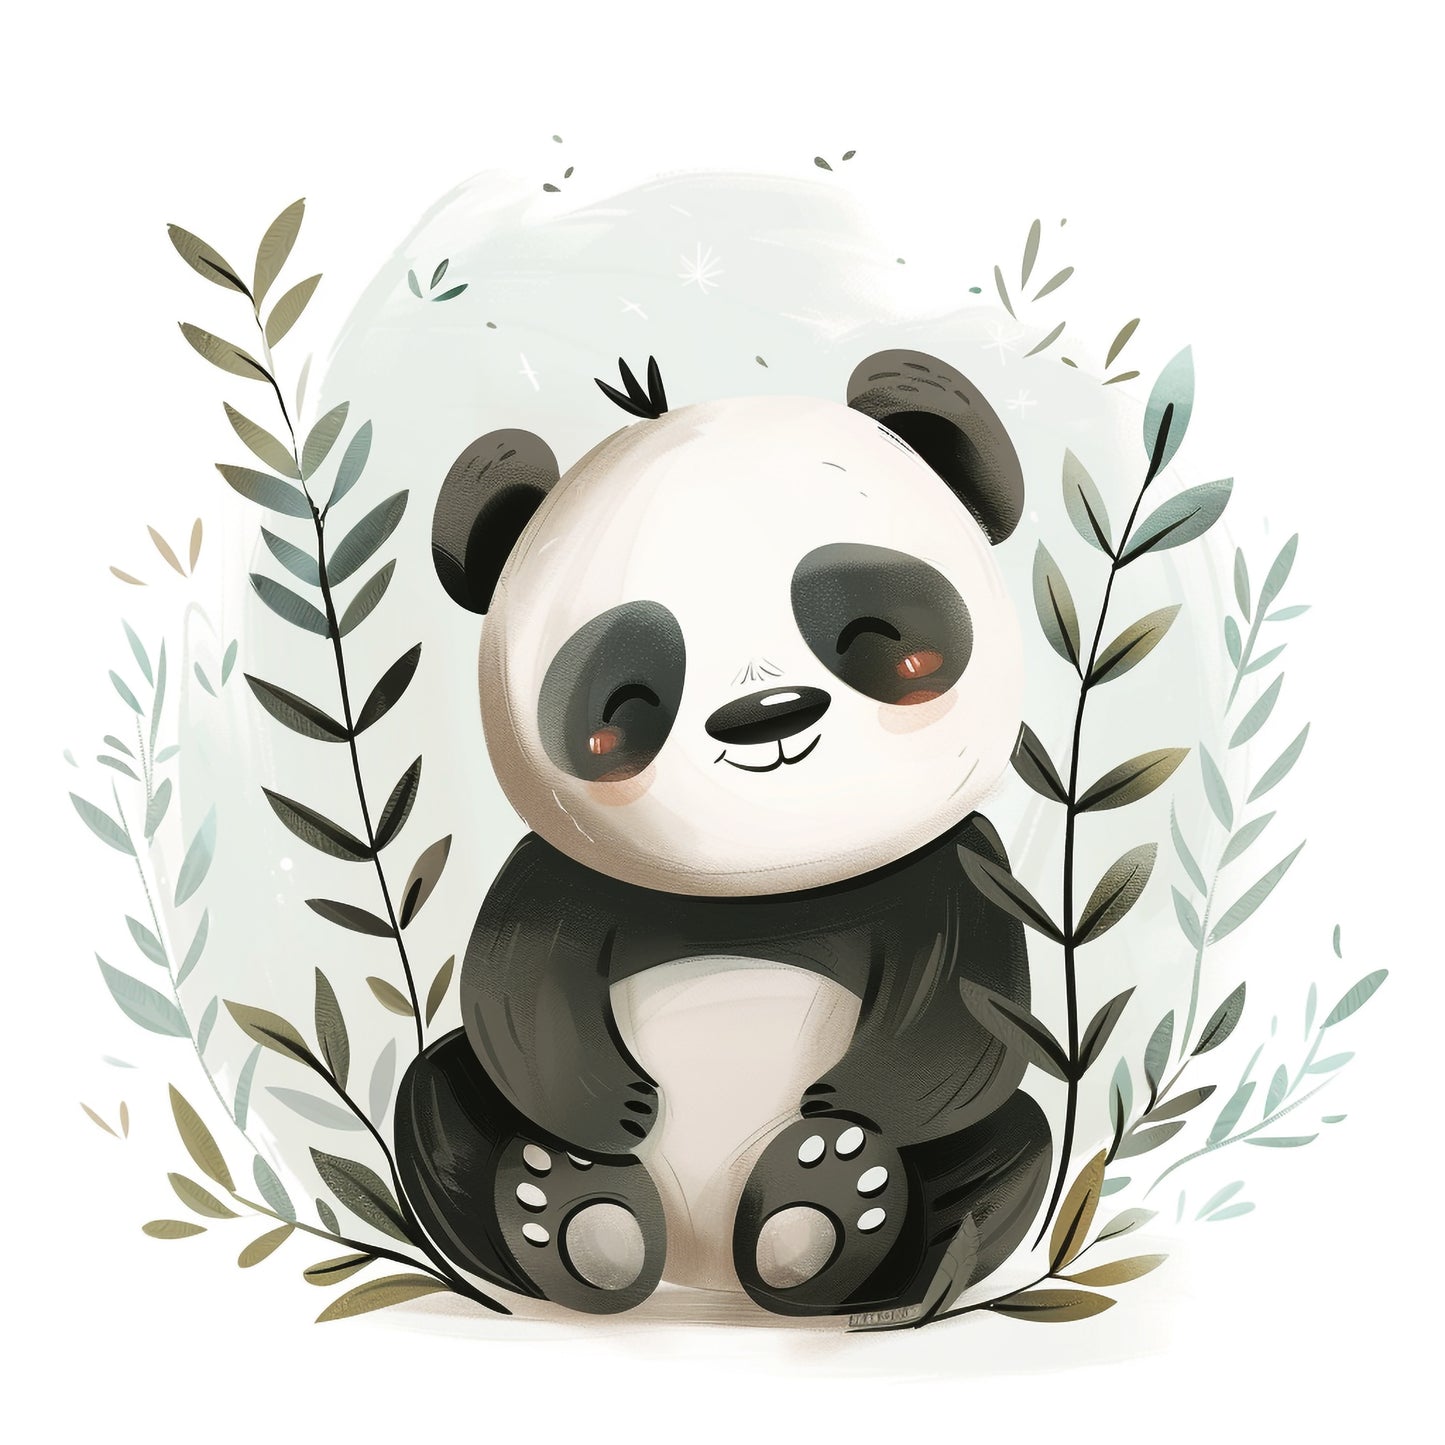 Adorable Whimsical Panda Airbrush Illustration with Plants